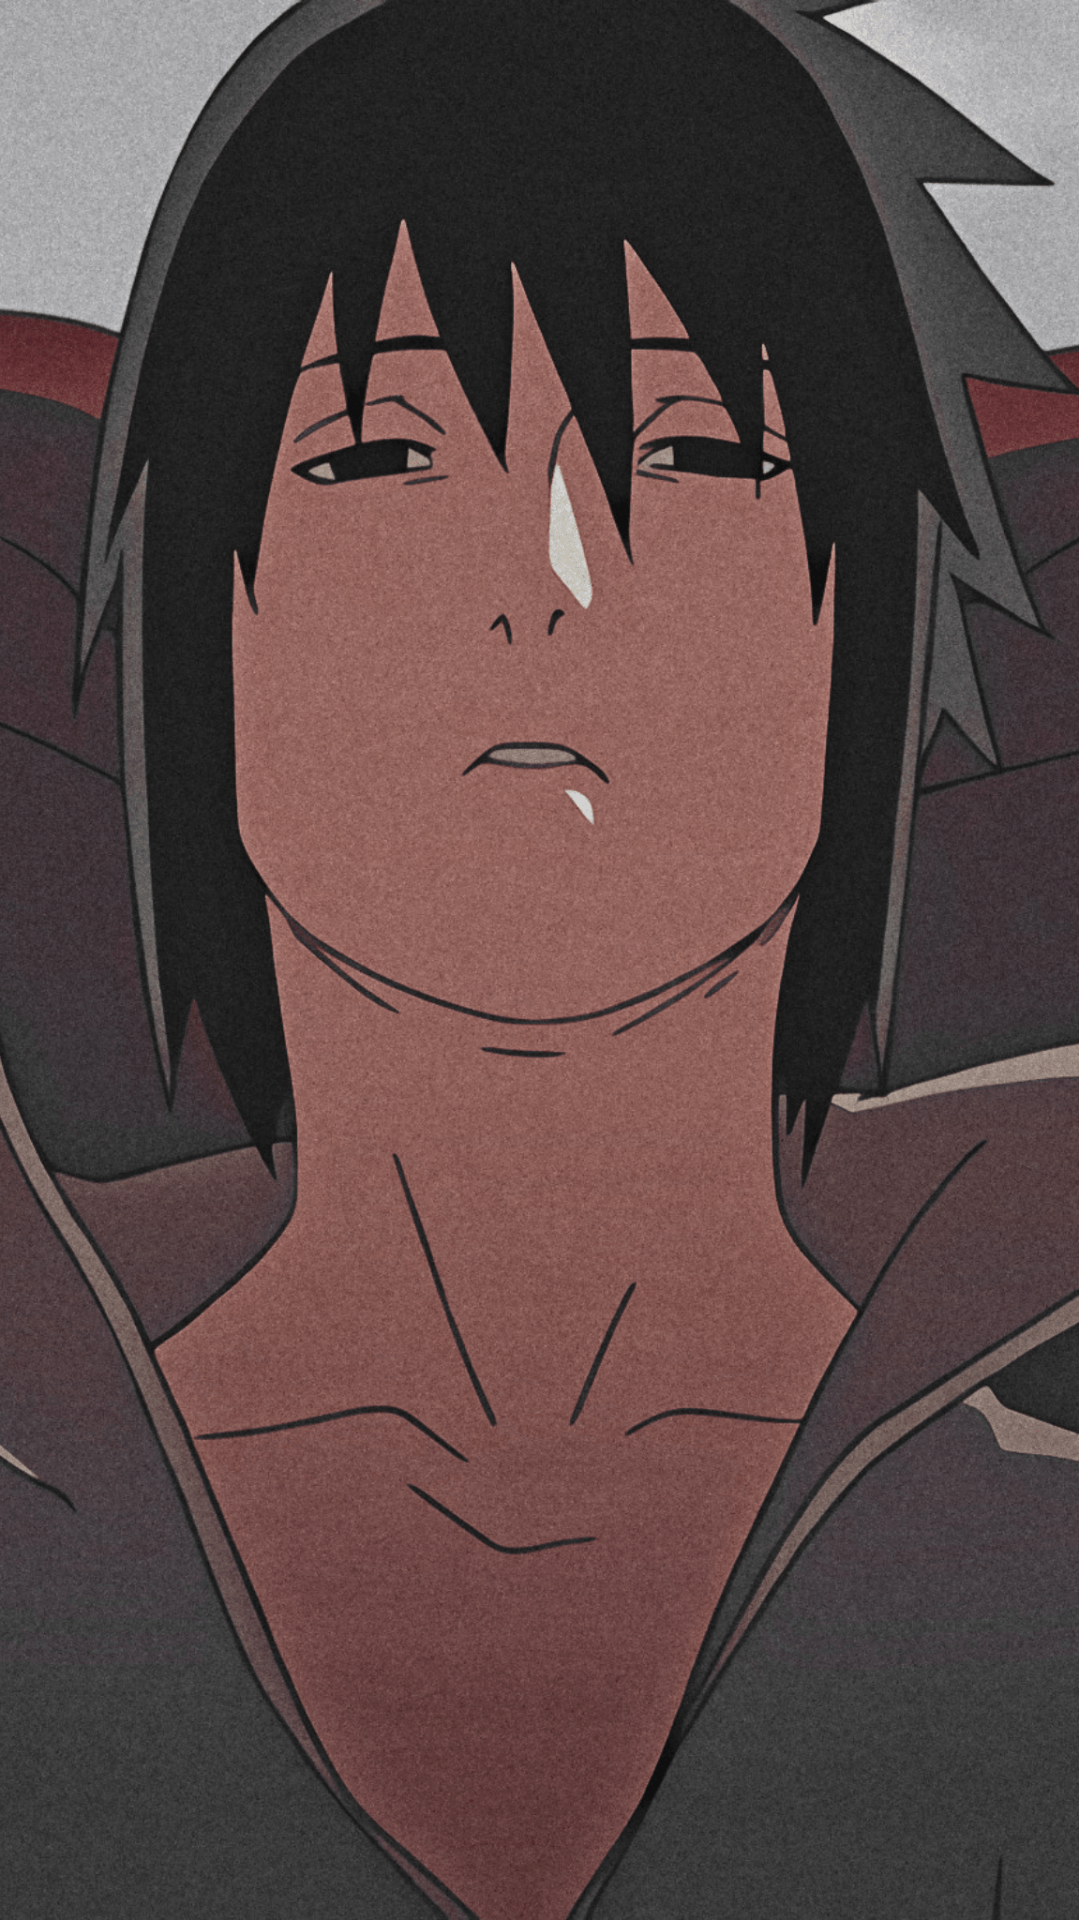 A digital artwork of Itachi Uchiha from Naruto. He is wearing a black hooded jacket and has a tear rolling down his right eye. - Sasuke Uchiha